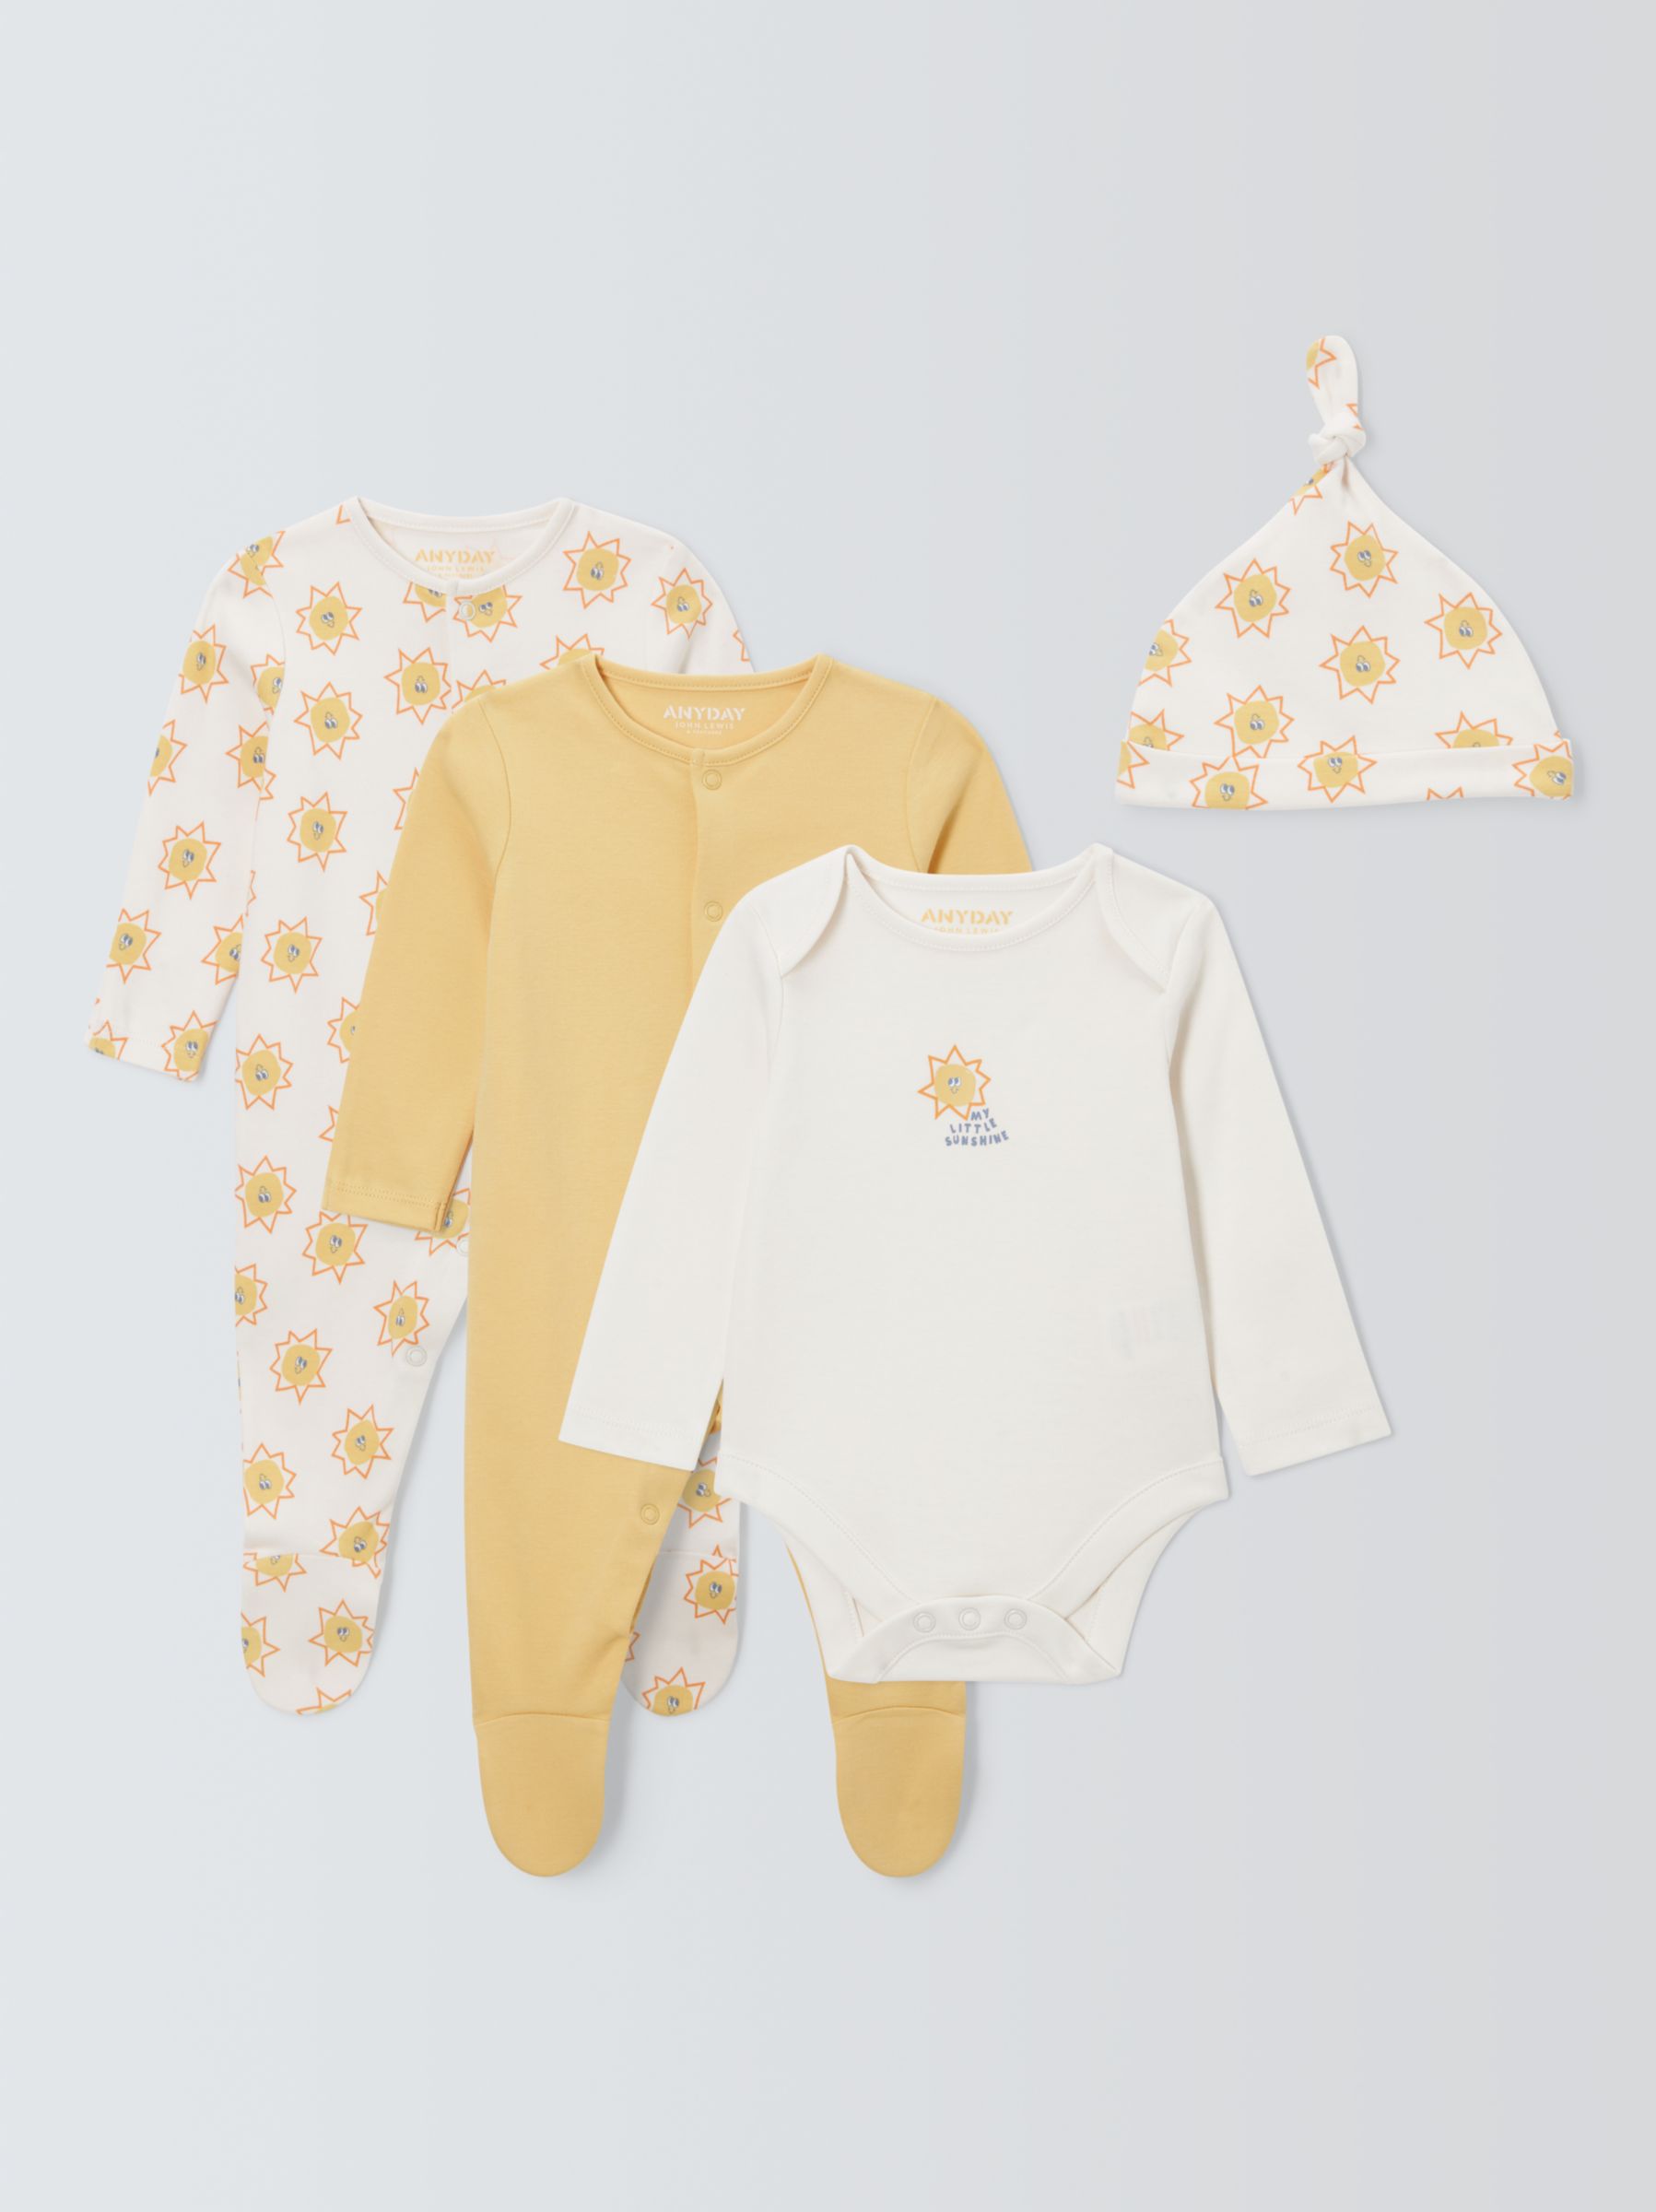 Buy John Lewis ANYDAY Baby Sunflower Sleepsuit, Bodysuit and Hat Set, Yellow Online at johnlewis.com